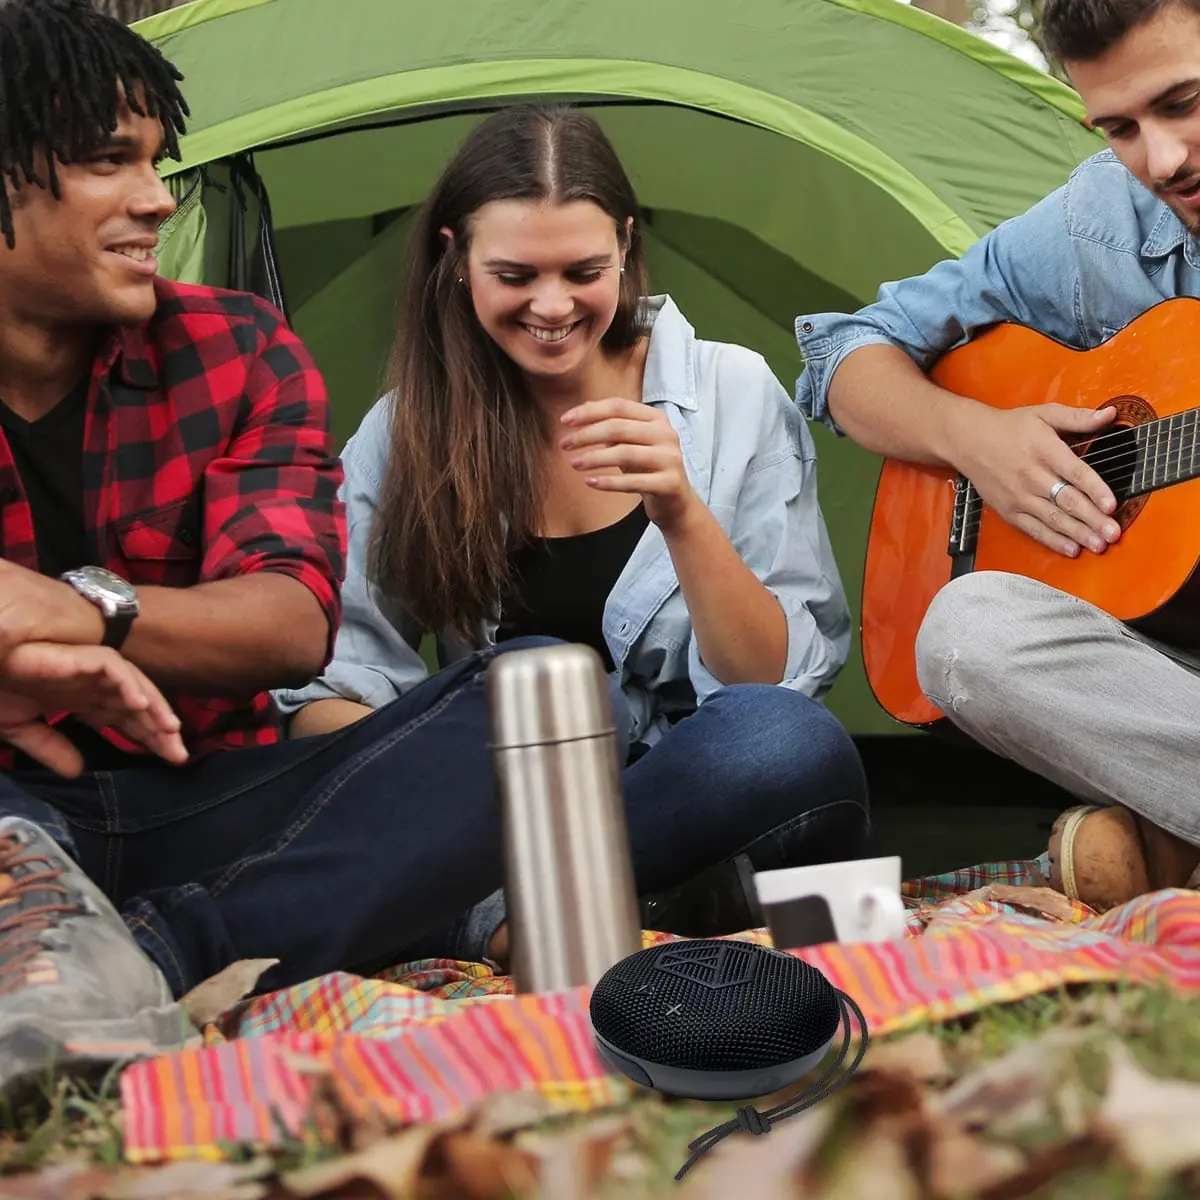 DOTBEATS Mini Wireless Bluetooth Speaker, Black,  sits atop a mat, encircled by three campers